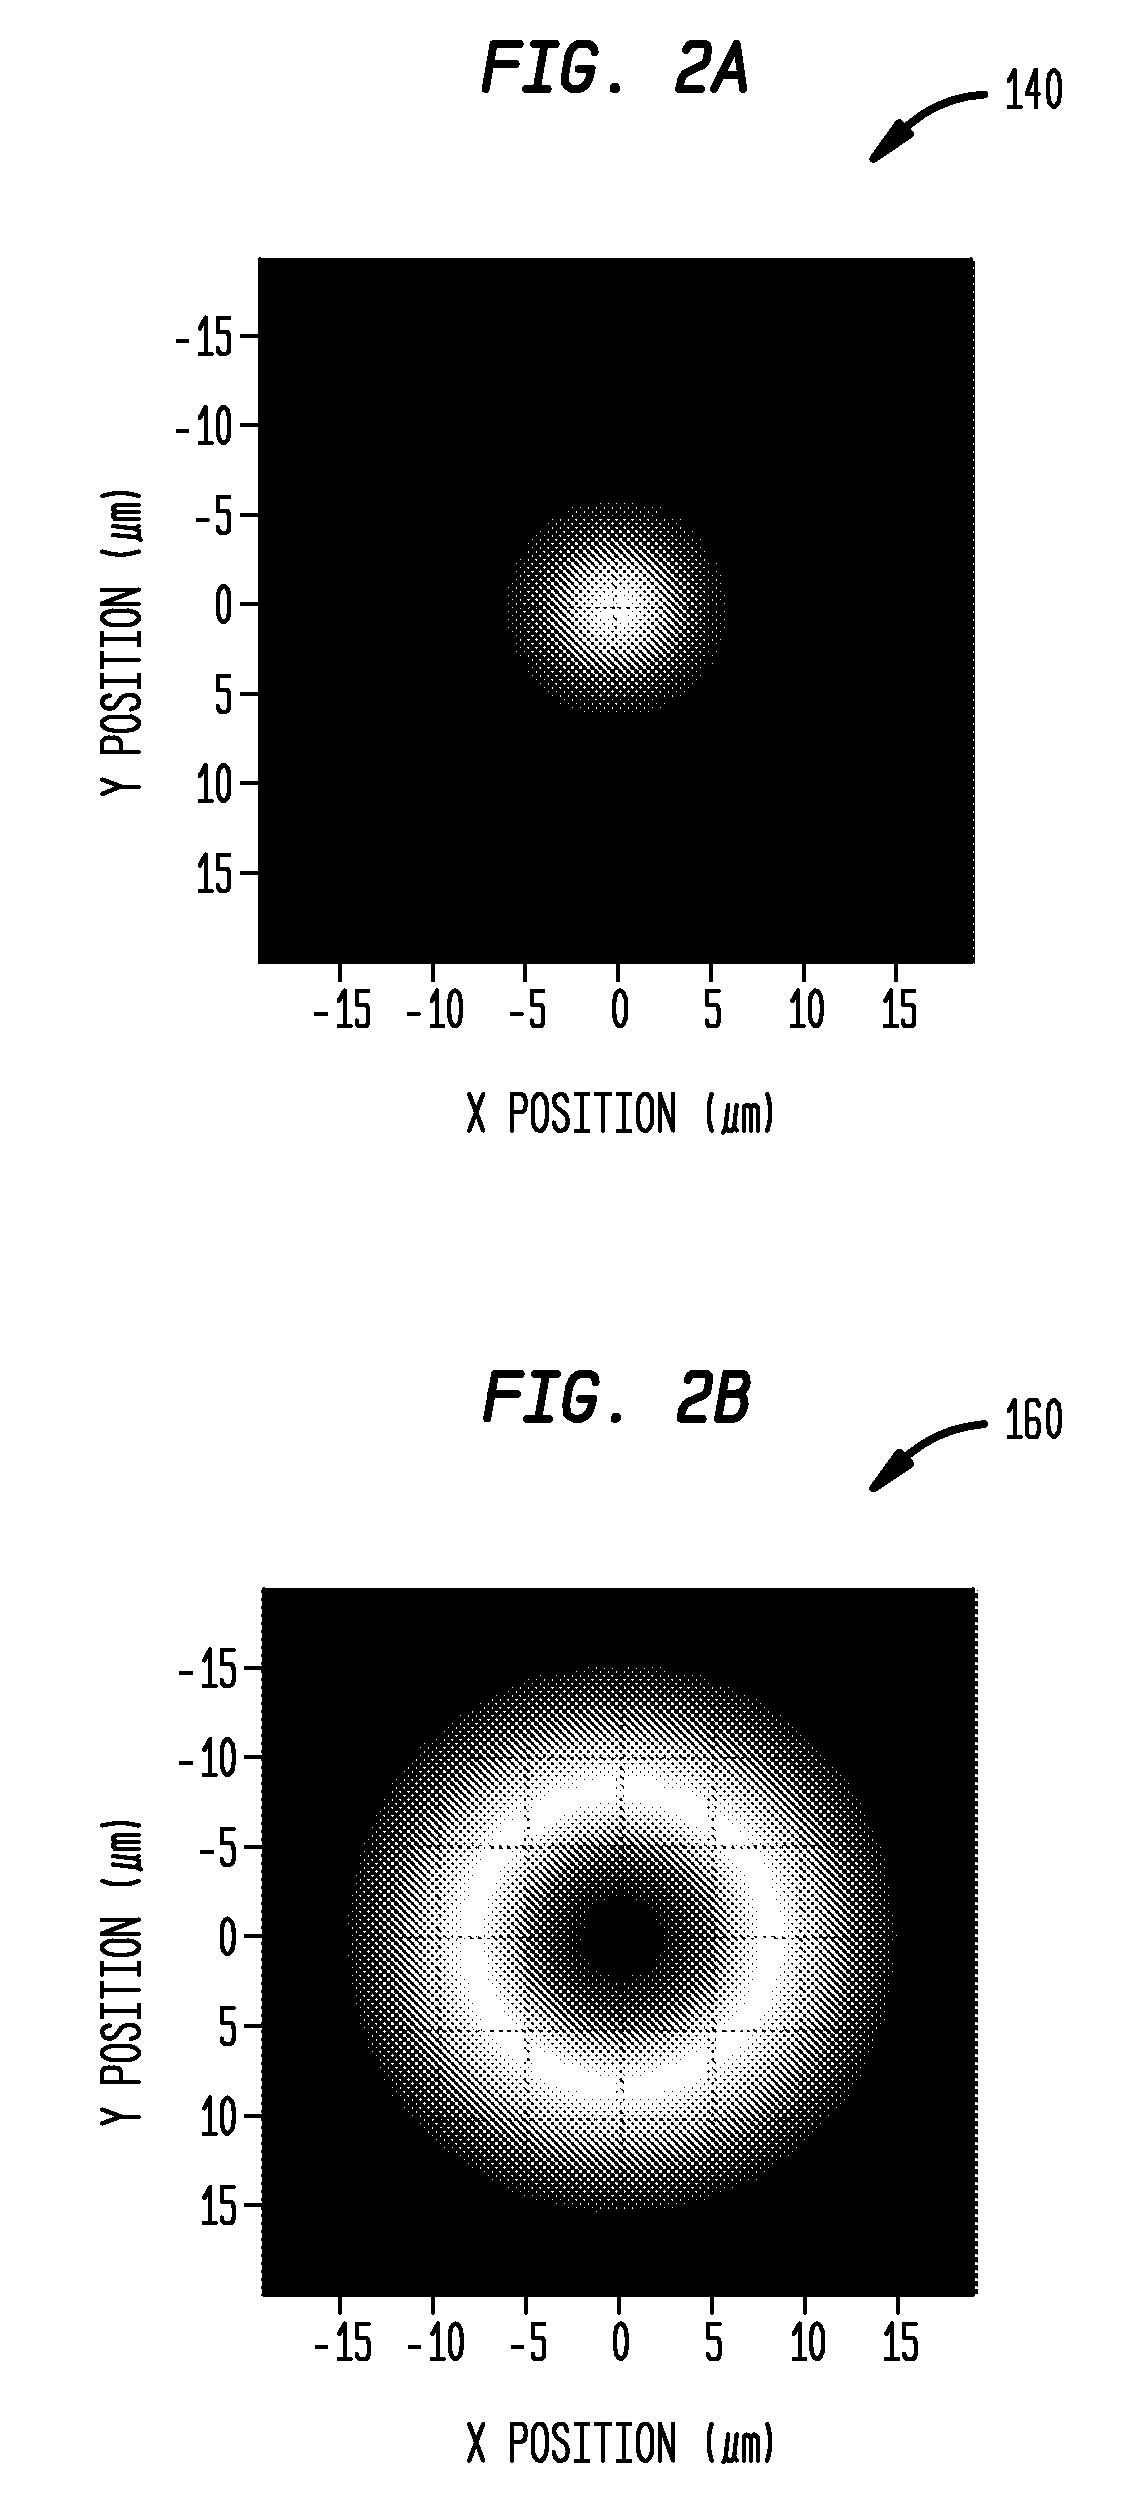 Optical fiber devices and methods for interconnecting dissimilar fibers